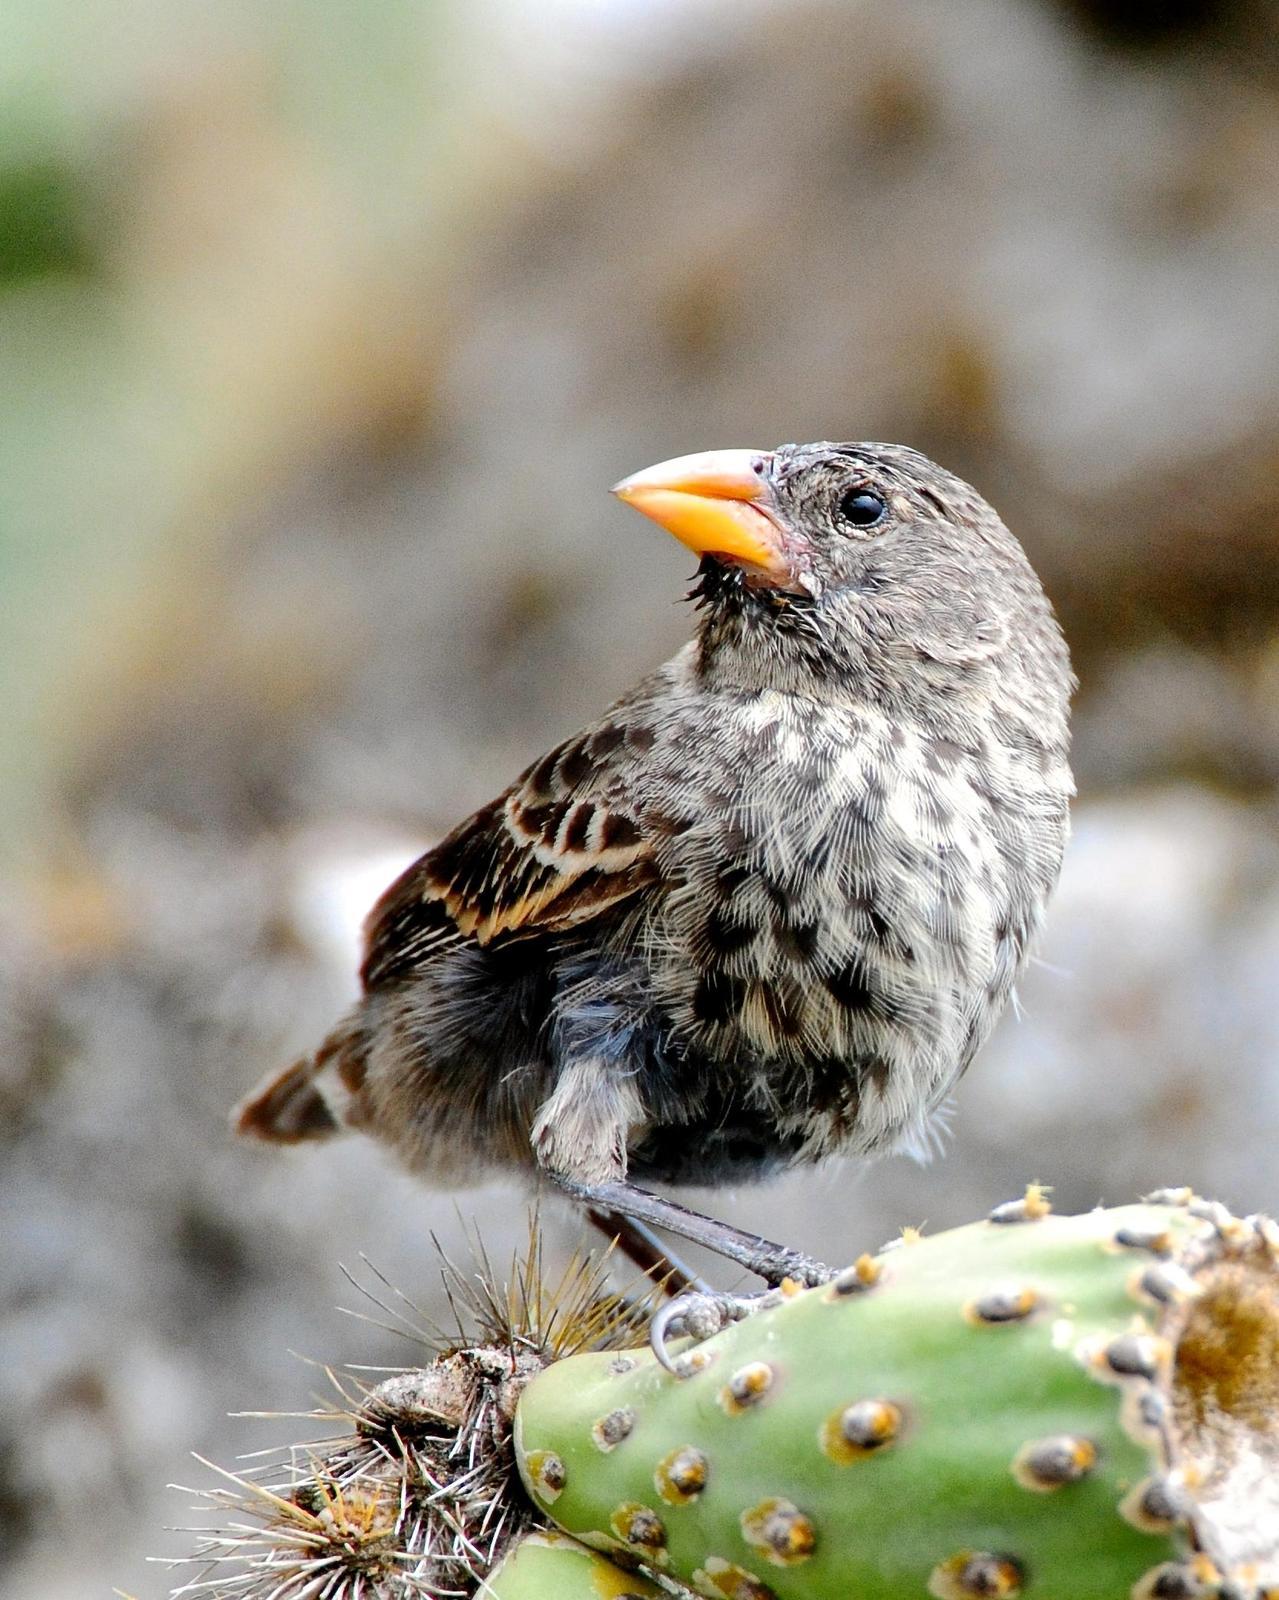 Common Cactus-Finch Photo by Gerald Friesen